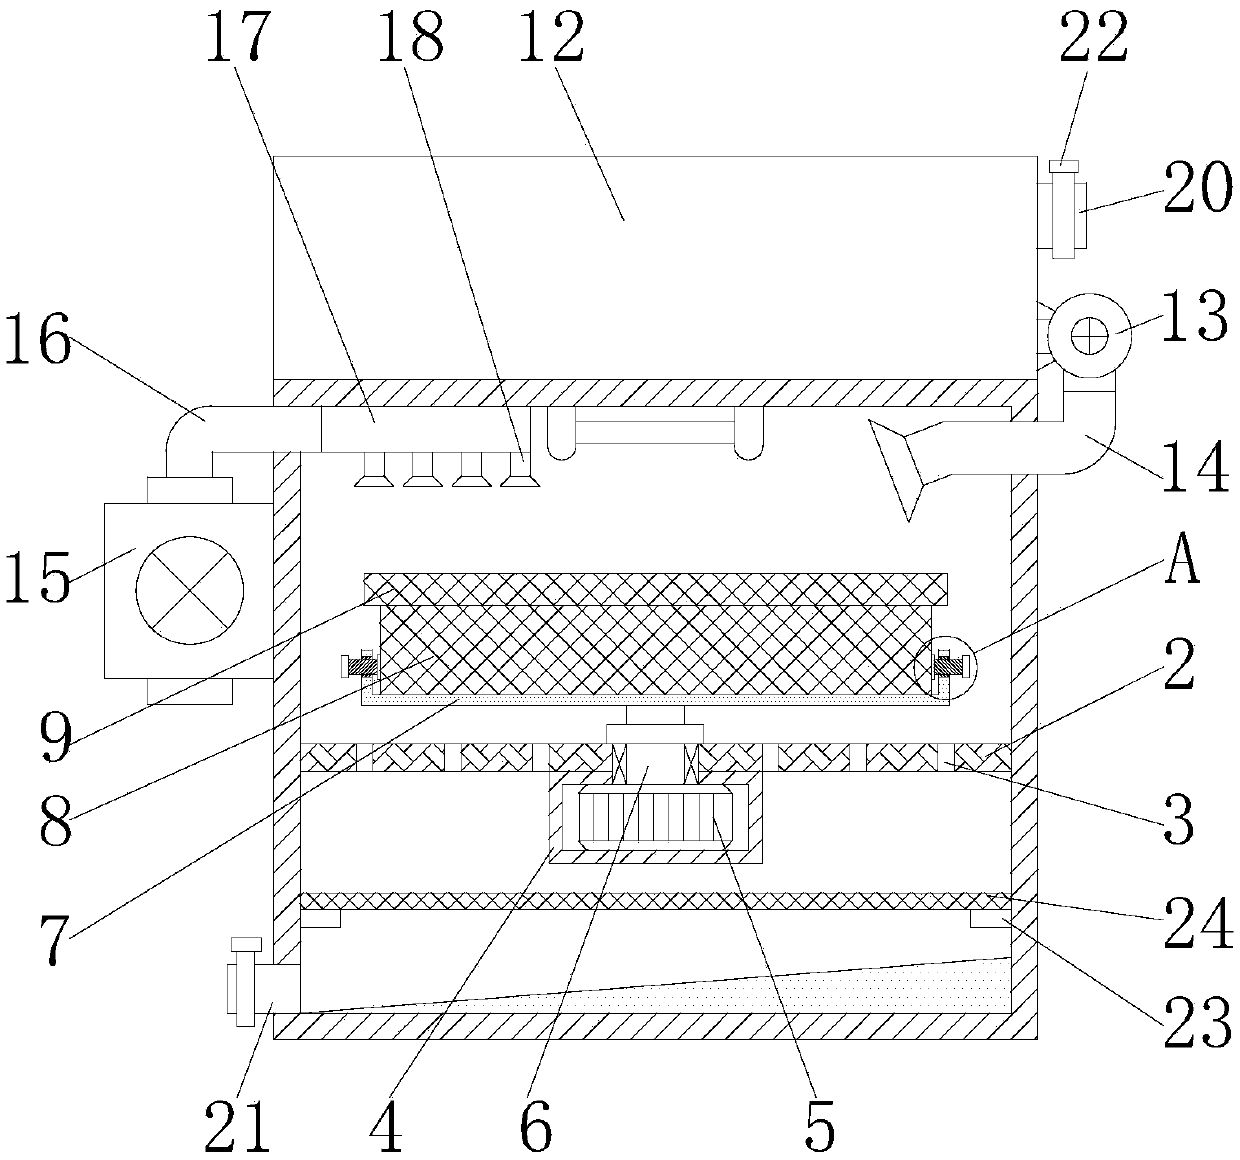 Screening treatment mechanism for microbial activity failure